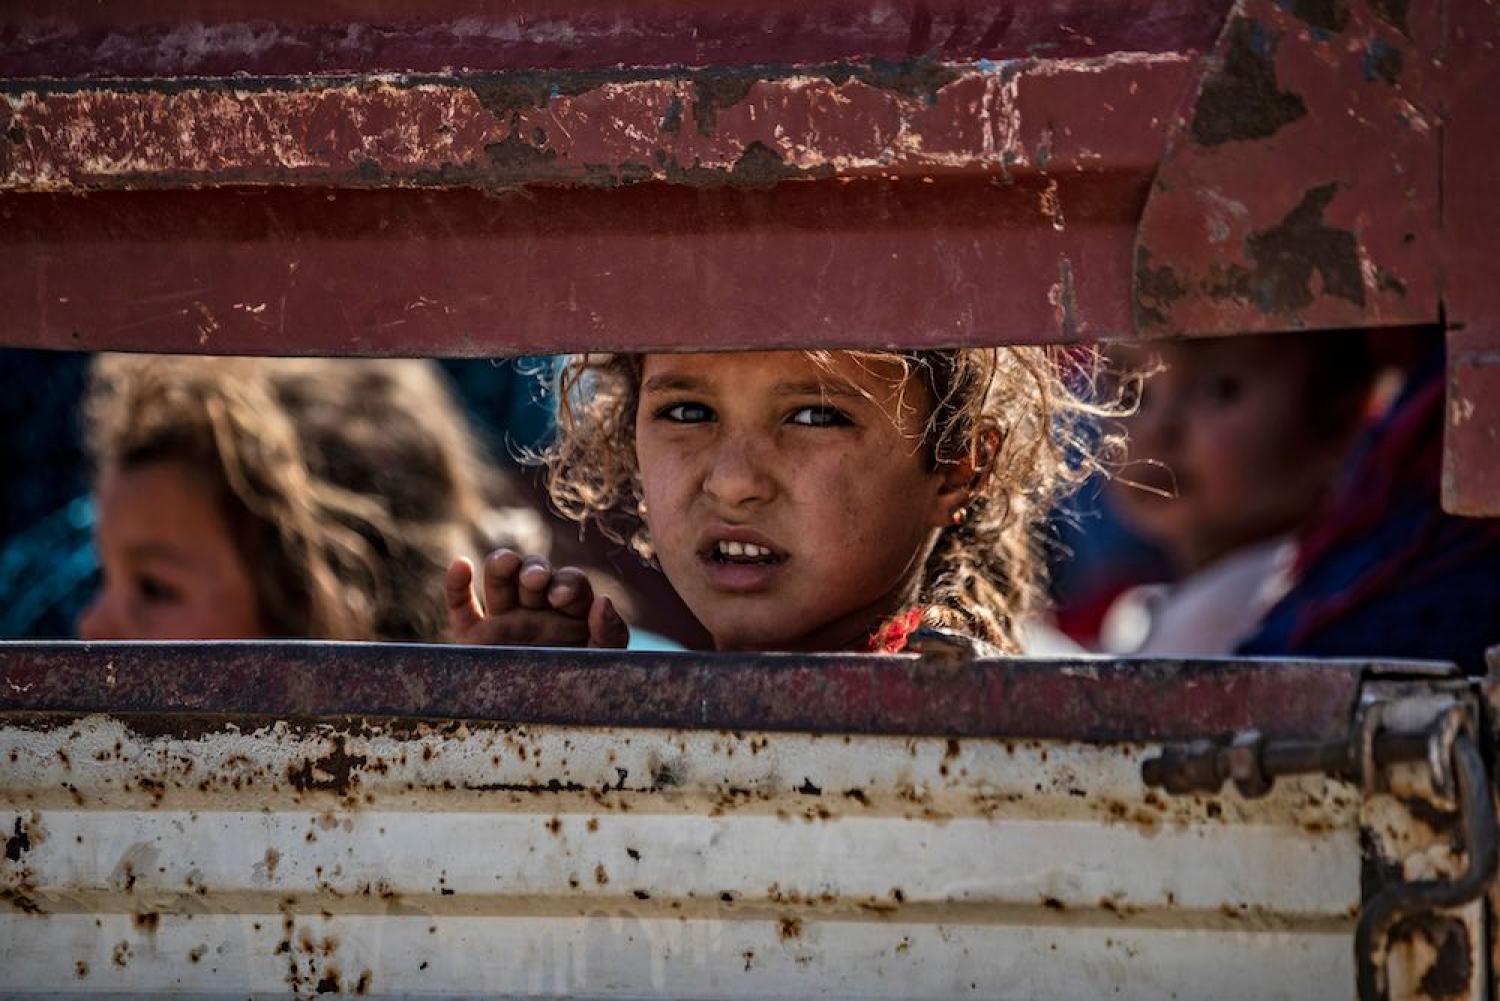 Syrian Arab and Kurdish civilians arrive at Tall Tamr town, in Syria’s Hasakeh province, after fleeing Turkish bombardment along the border, 10 October 2019 (Photo: Delil Souleiman/AFP/Getty Images)